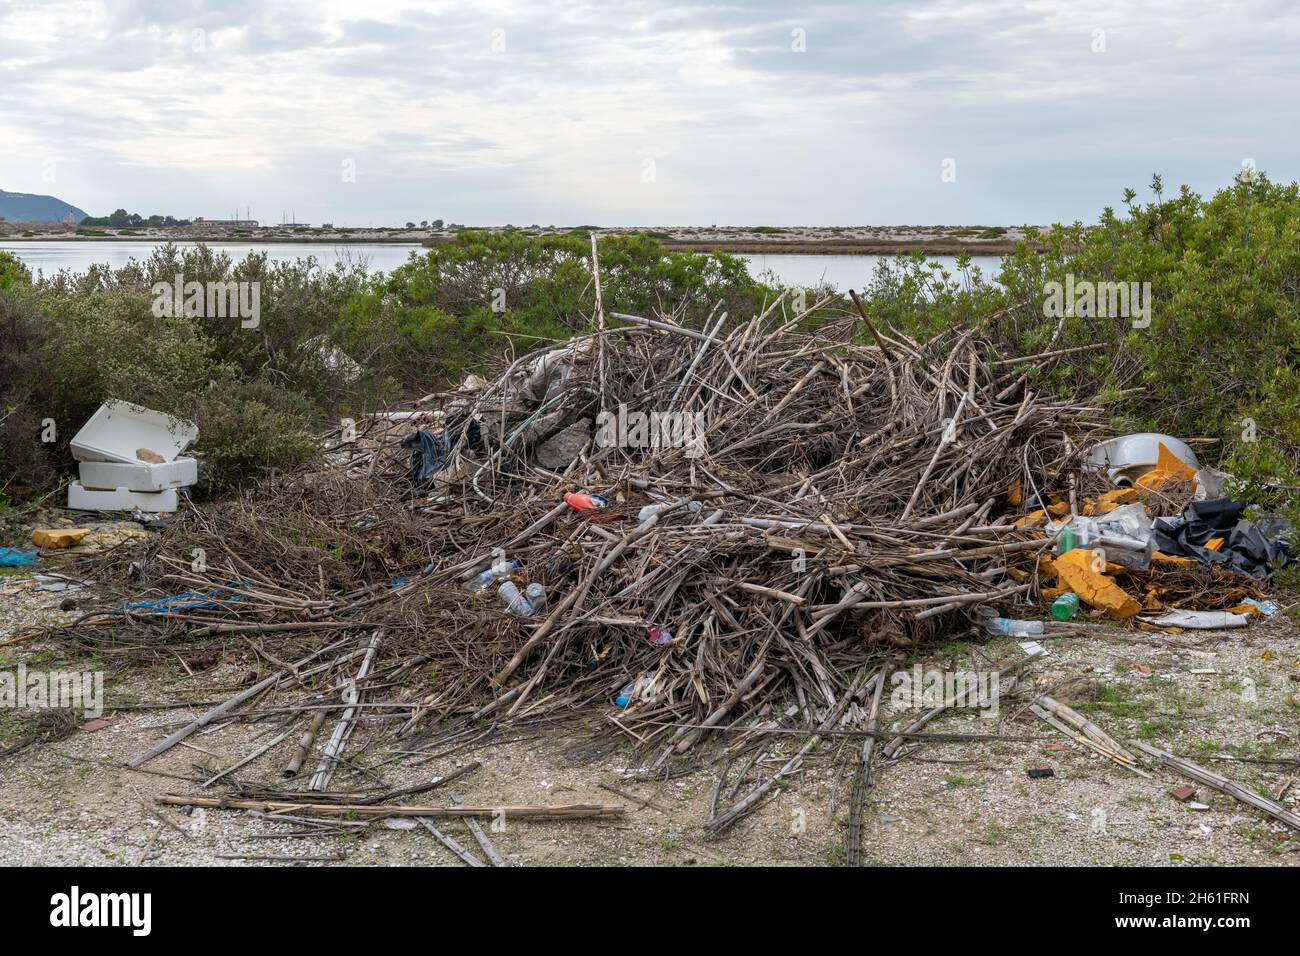 Illegal dumping of garbage causing environmental damage to the countryside. Stock Photo